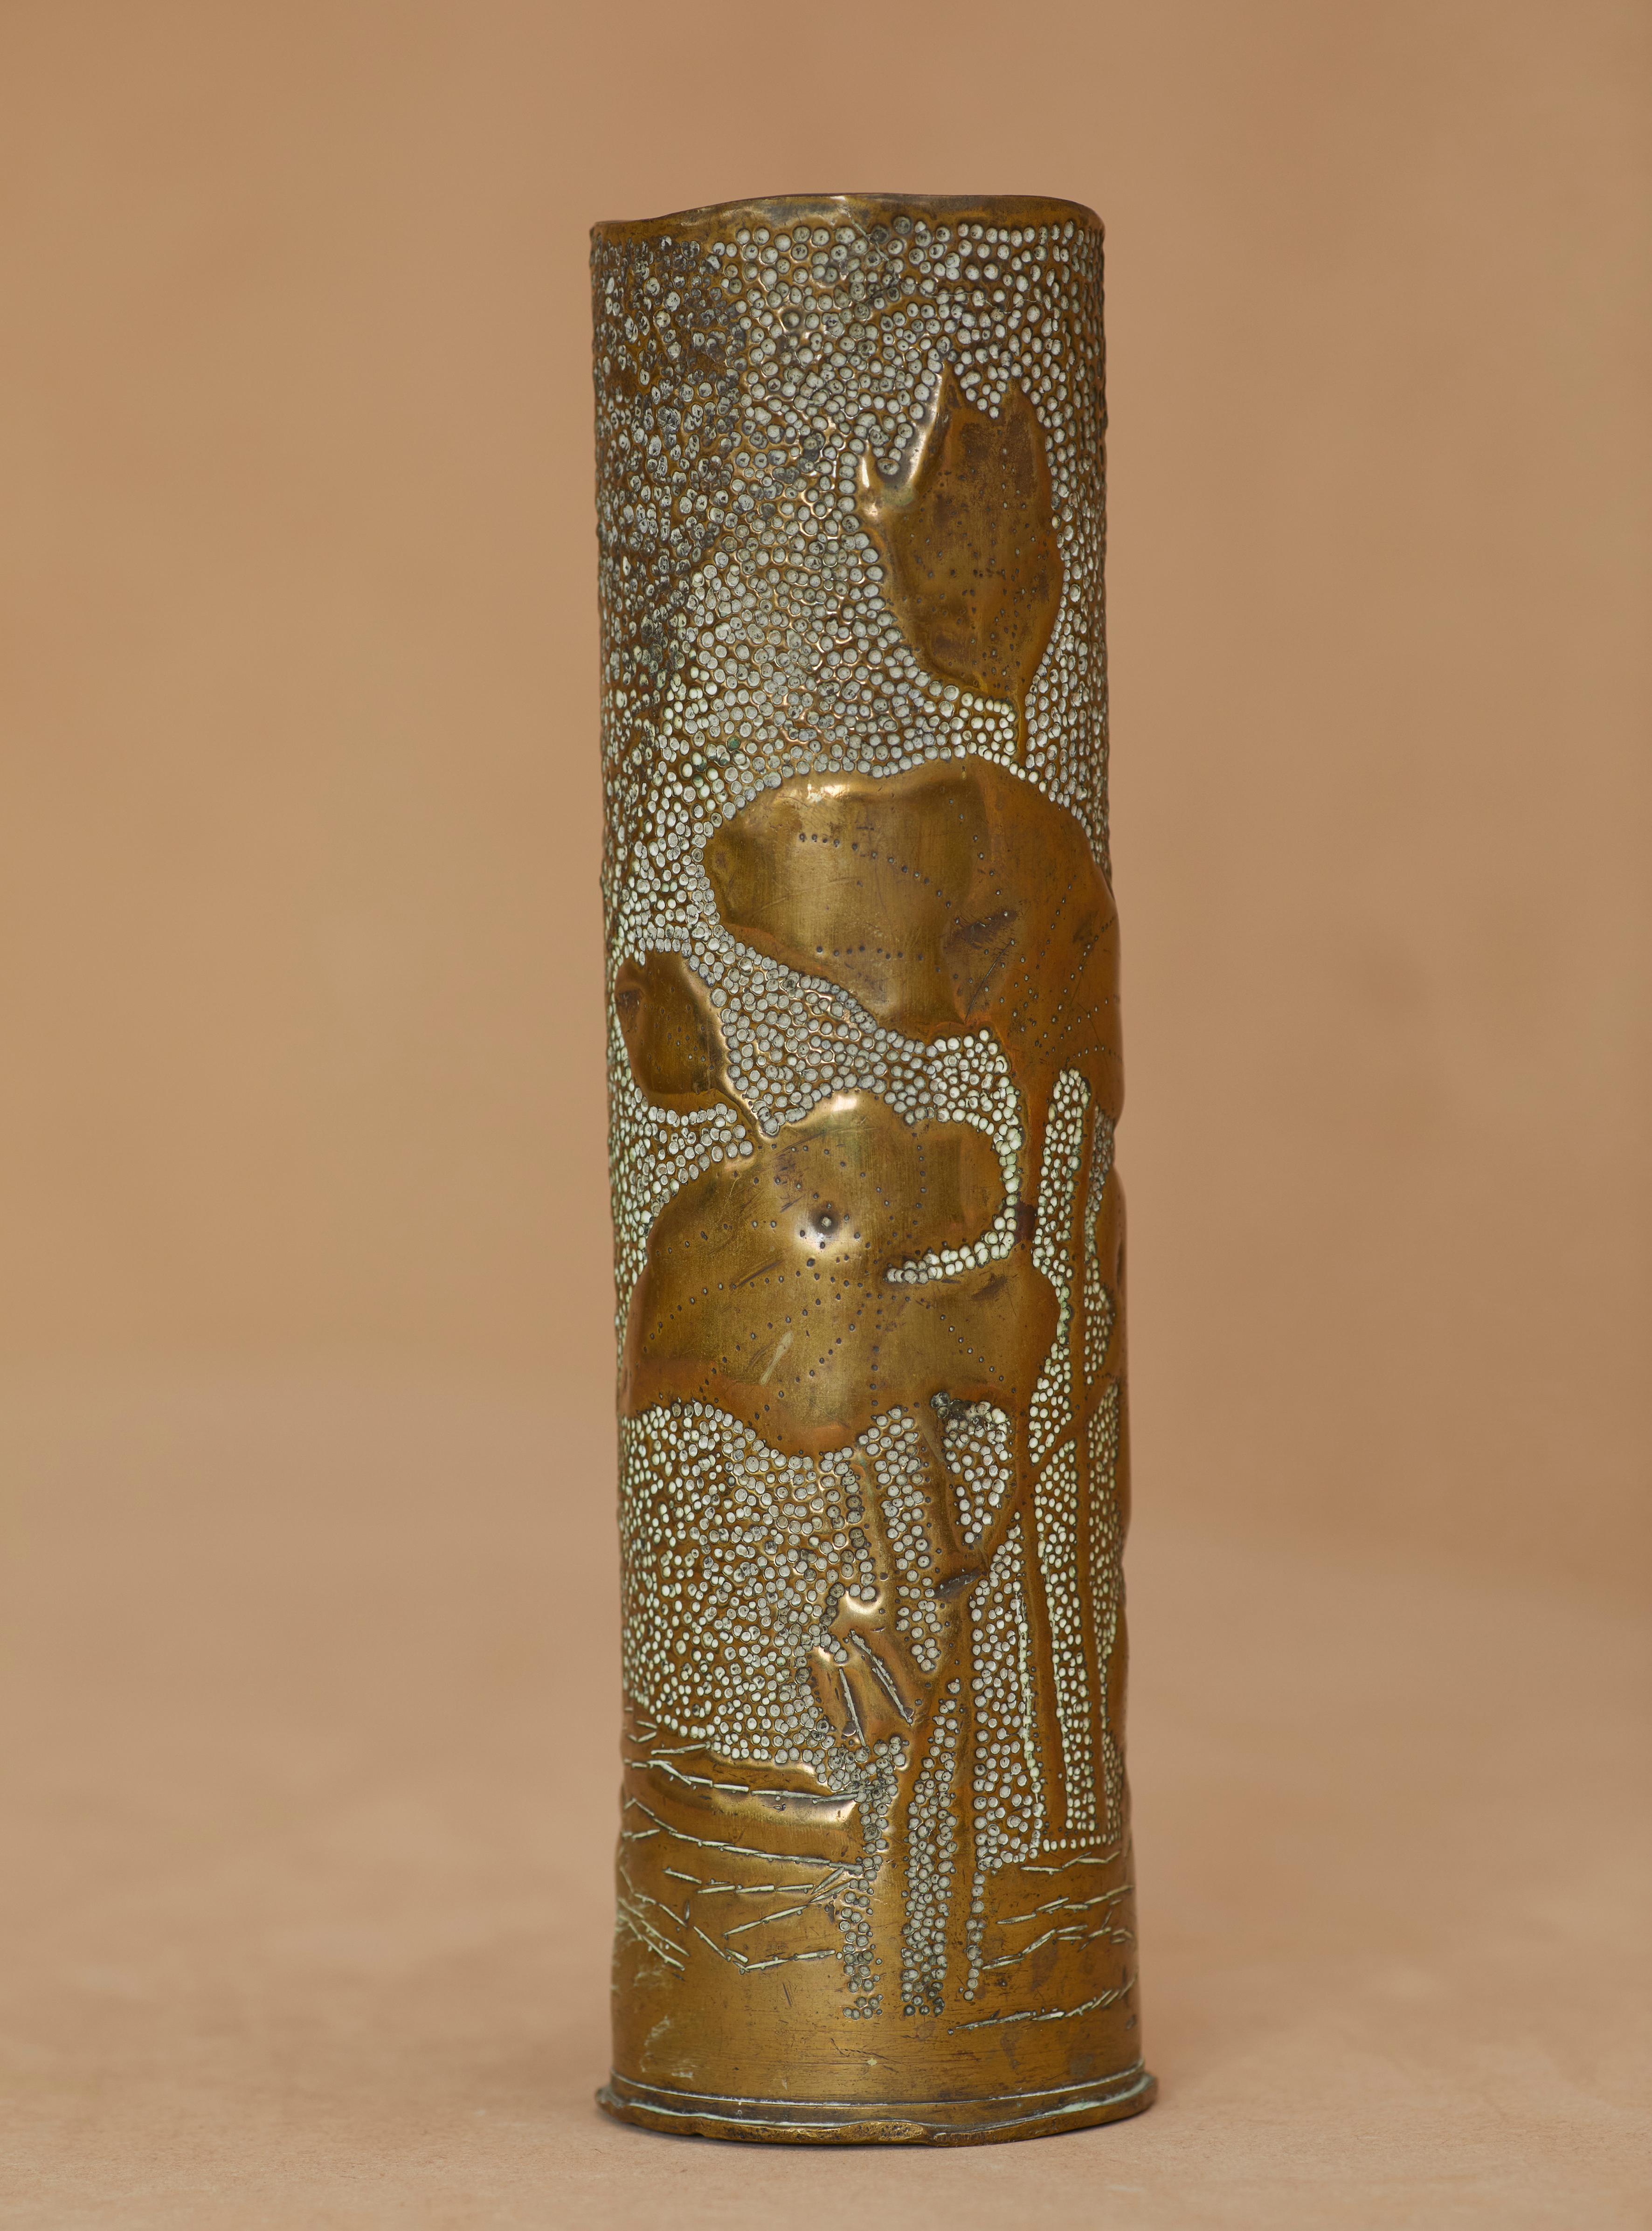 A unique, heavily patinated, hand-crafted historical memorabilia from World War 1, France, between 1914 and 1918.

Trench art (